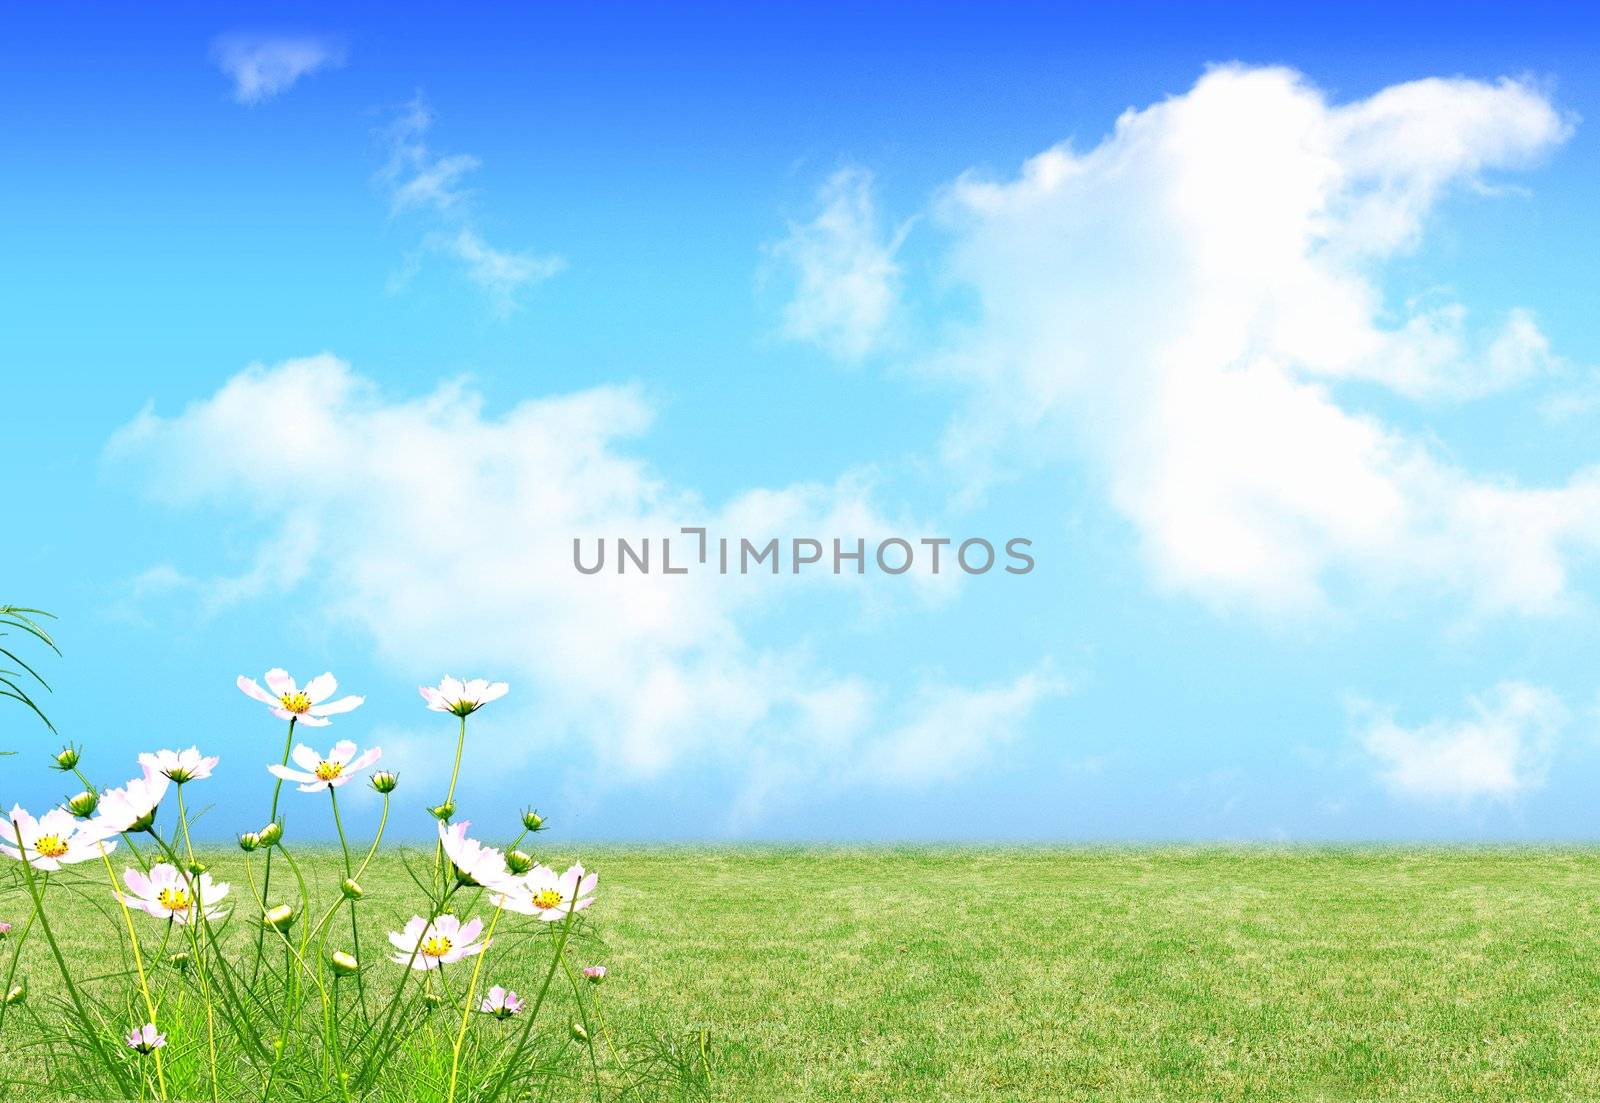 A nice fresh spring views with green field and flowers